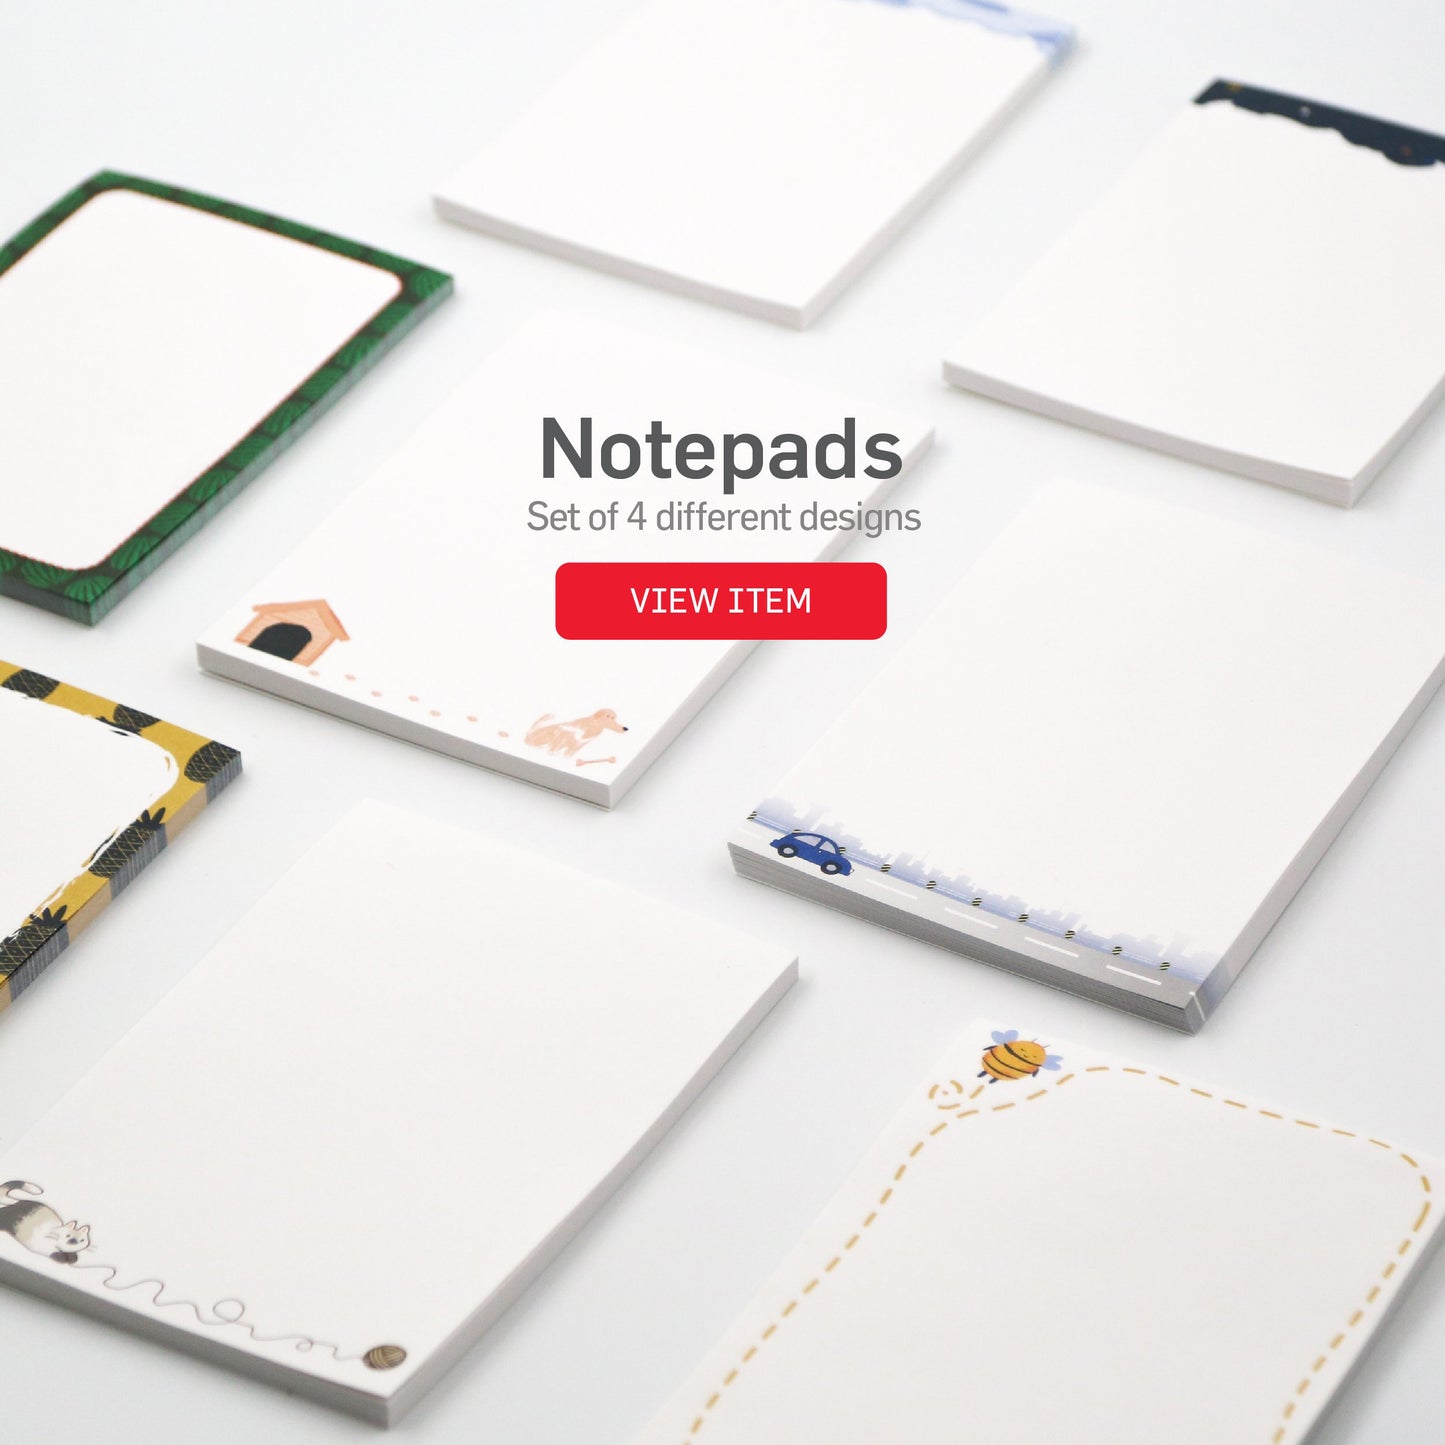 Notepads - Set of 4 different designs